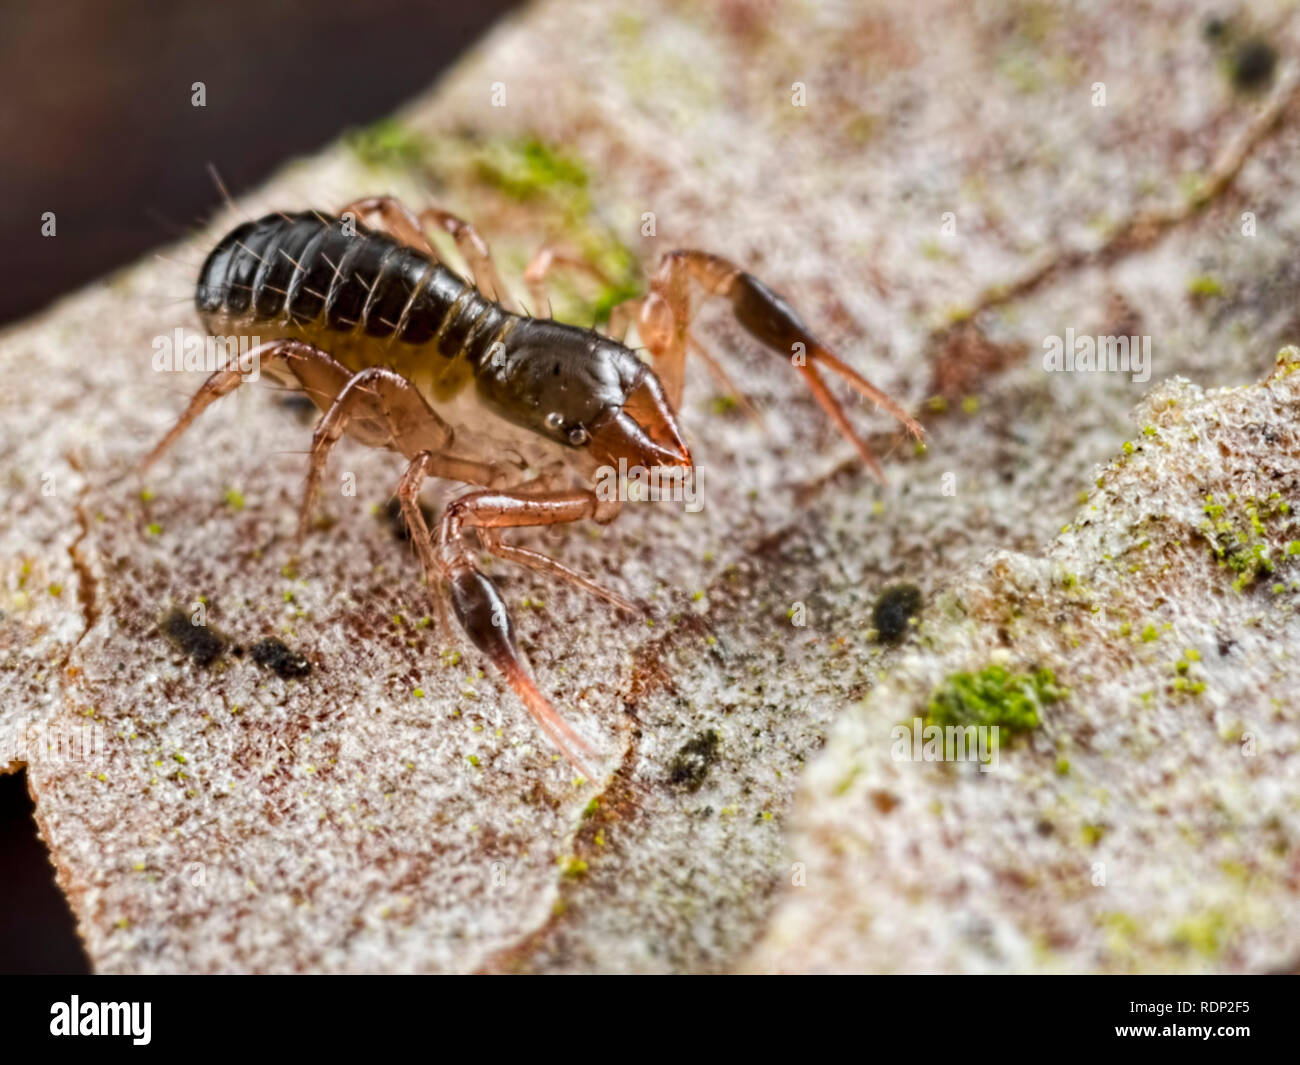 A Pseudoscorpion (Microbisium brevifemoratum), best education ID guess is that it is a Dark-clawed Chthonid Pseudoscorpion (Chthonius tenuis) Stock Photo